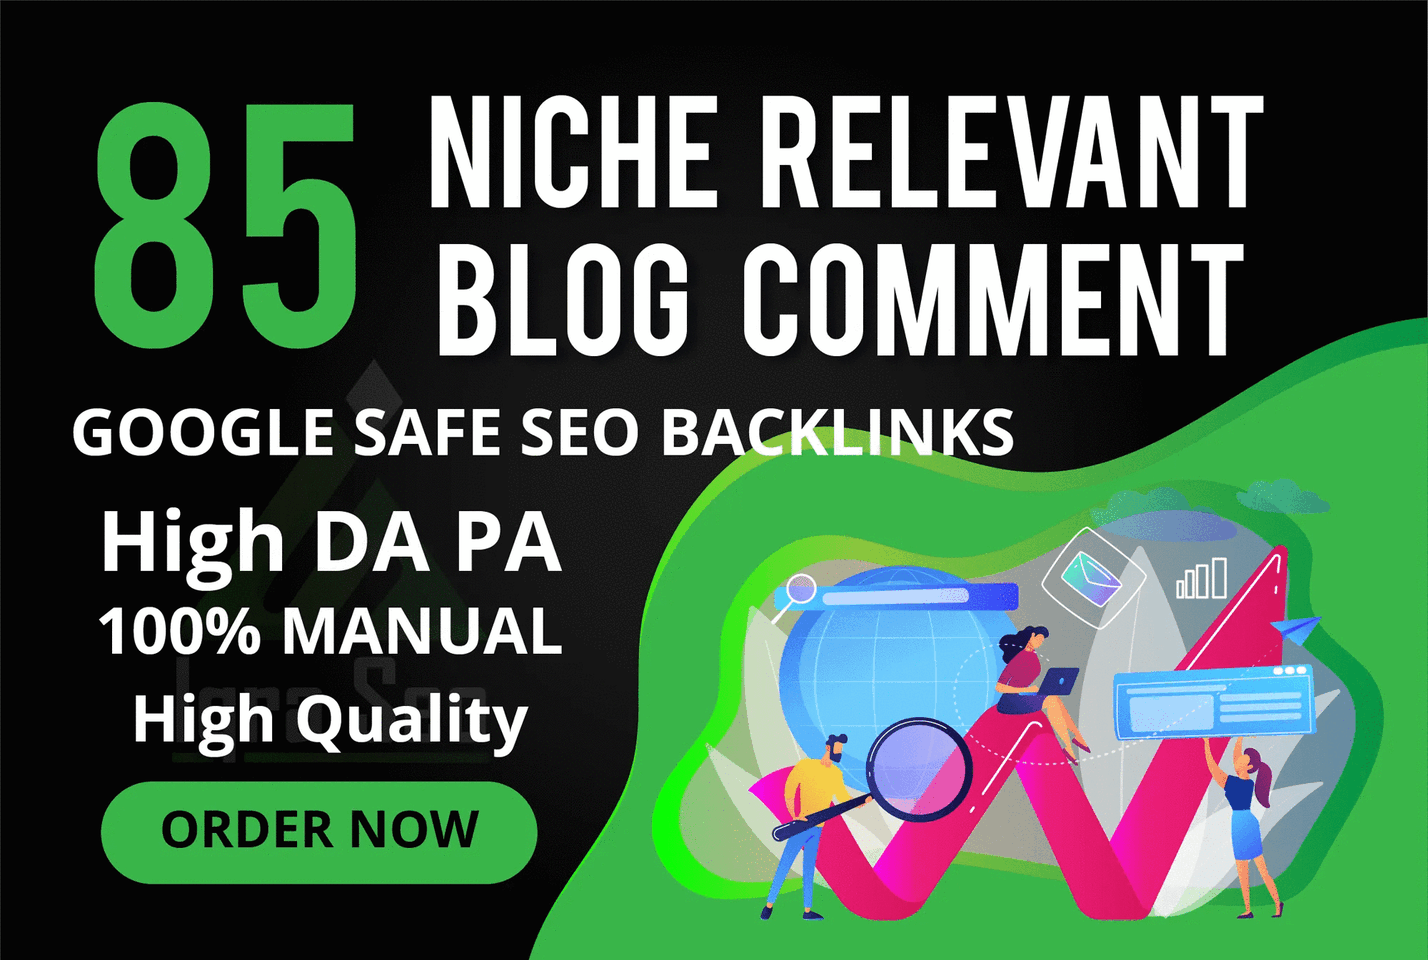 I will do manually high Quality 85 niche relevant blog comment backlinks